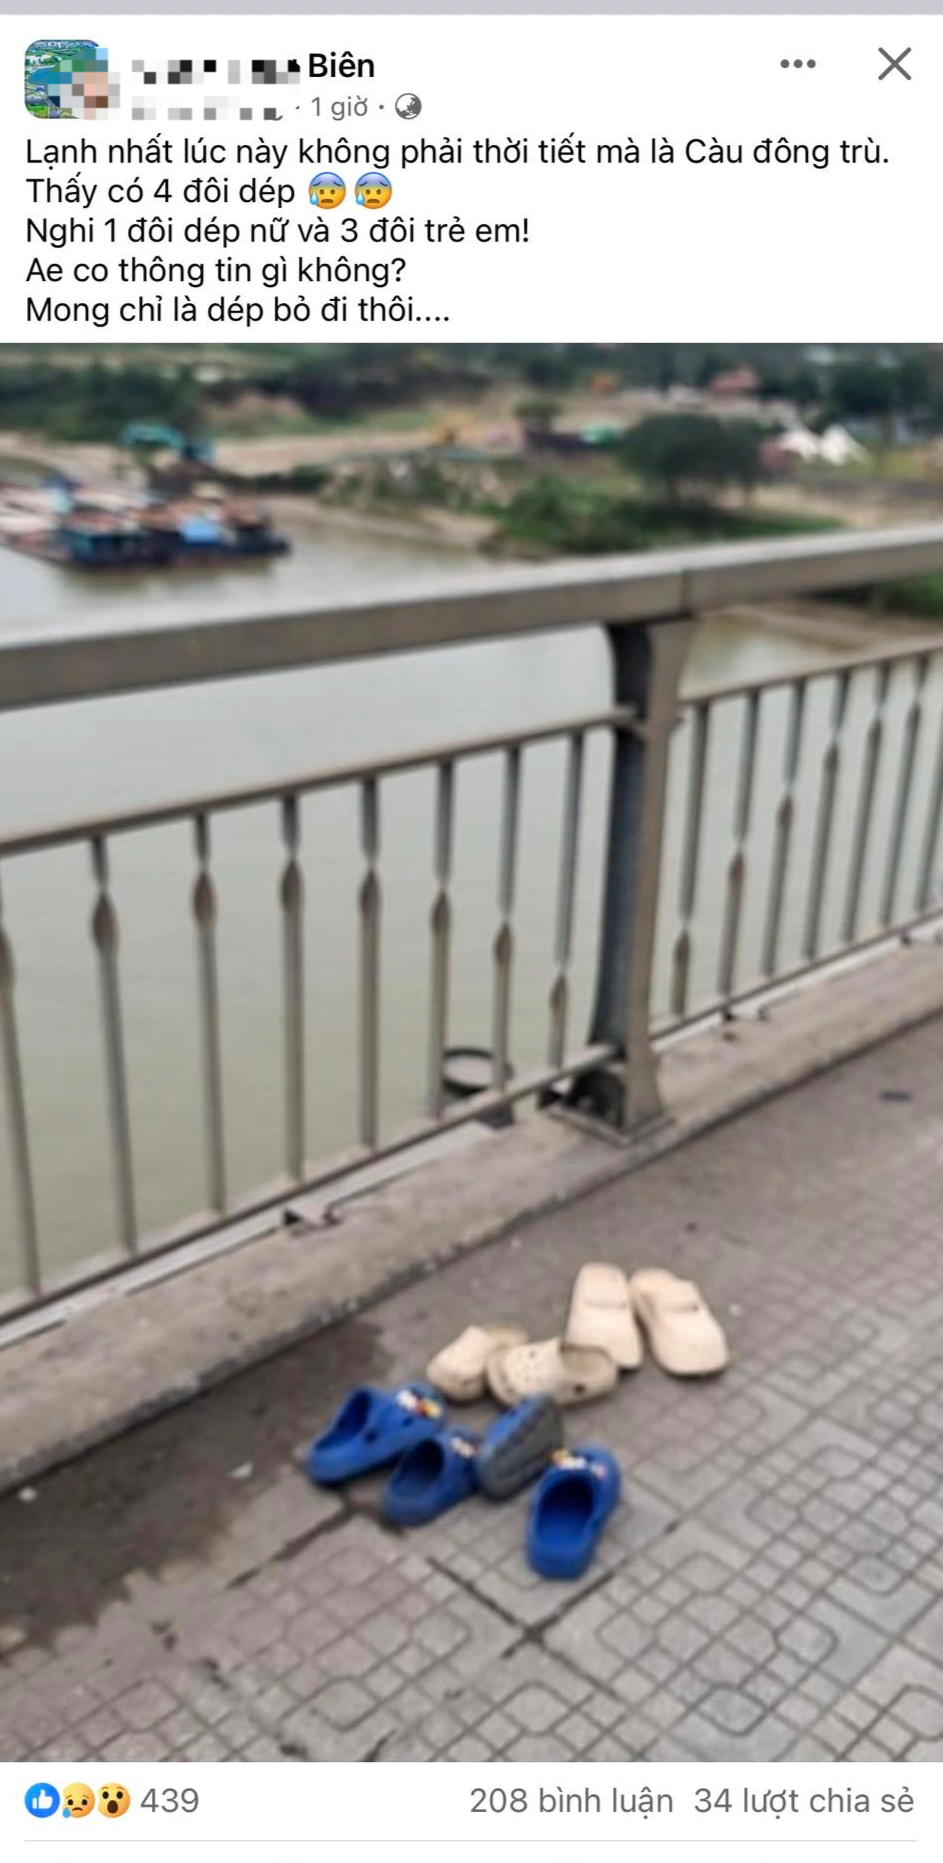 4 people suspected of jumping from Dong Tru bridge, police mobilized dozens of people to search - 2